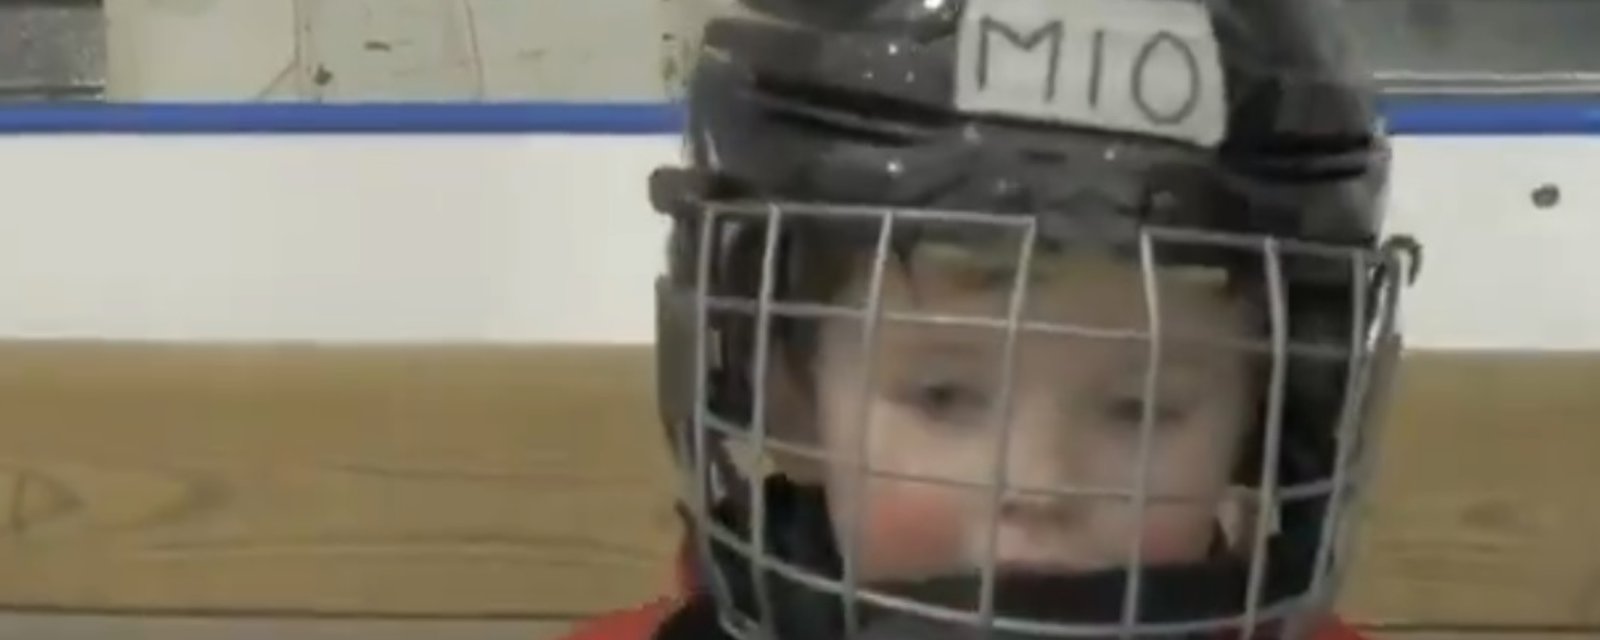 Meet Milo, a TWO year old hockey prodigy.